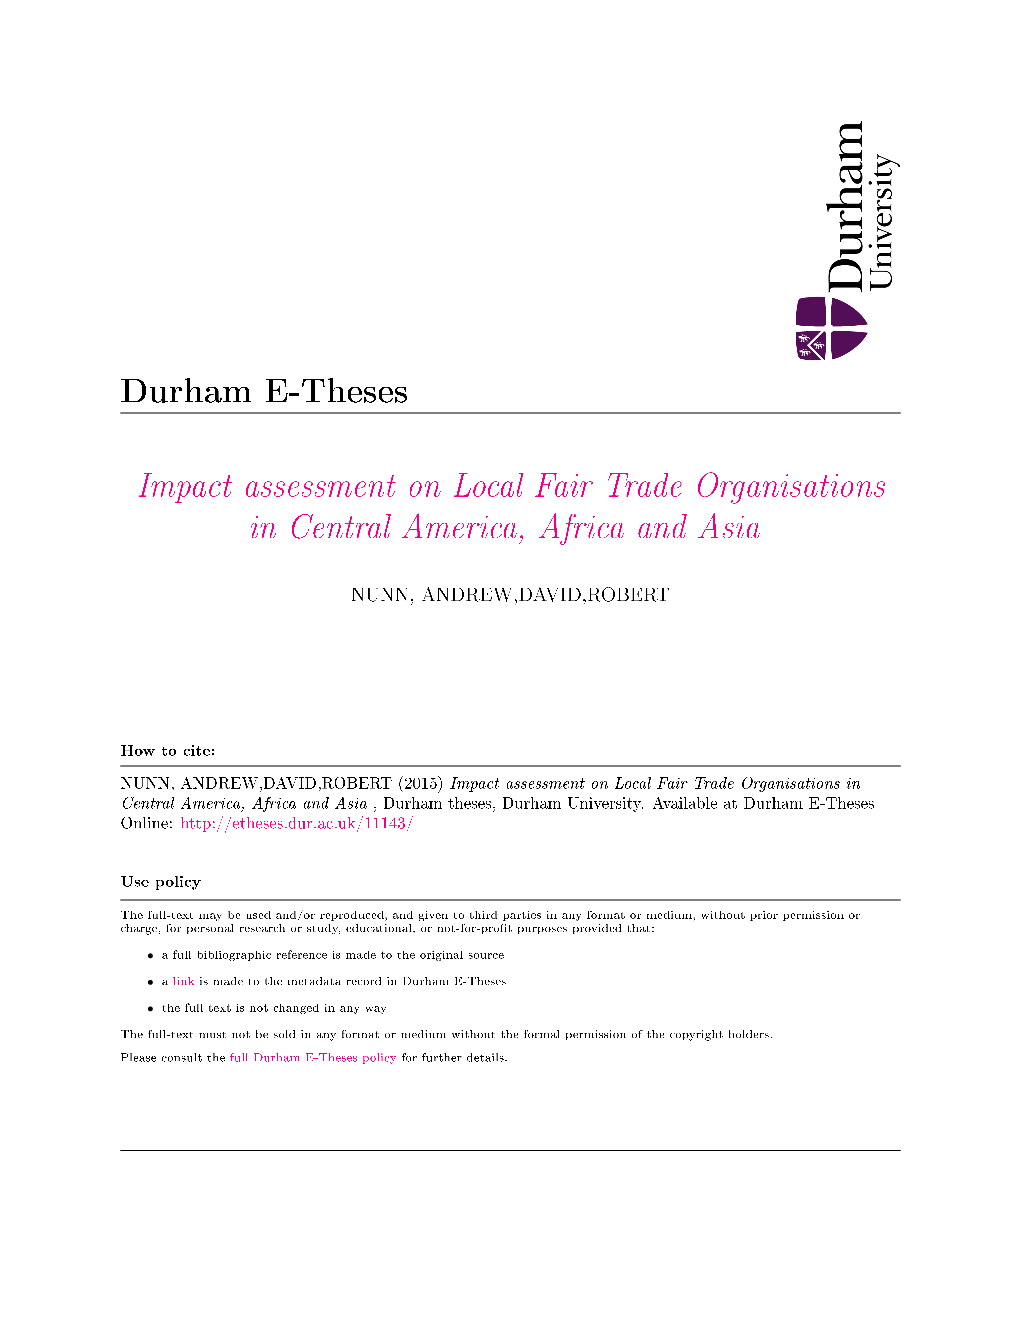 Impact Assessment on Local Fair Trade Organisations in Central America, Africa and Asia